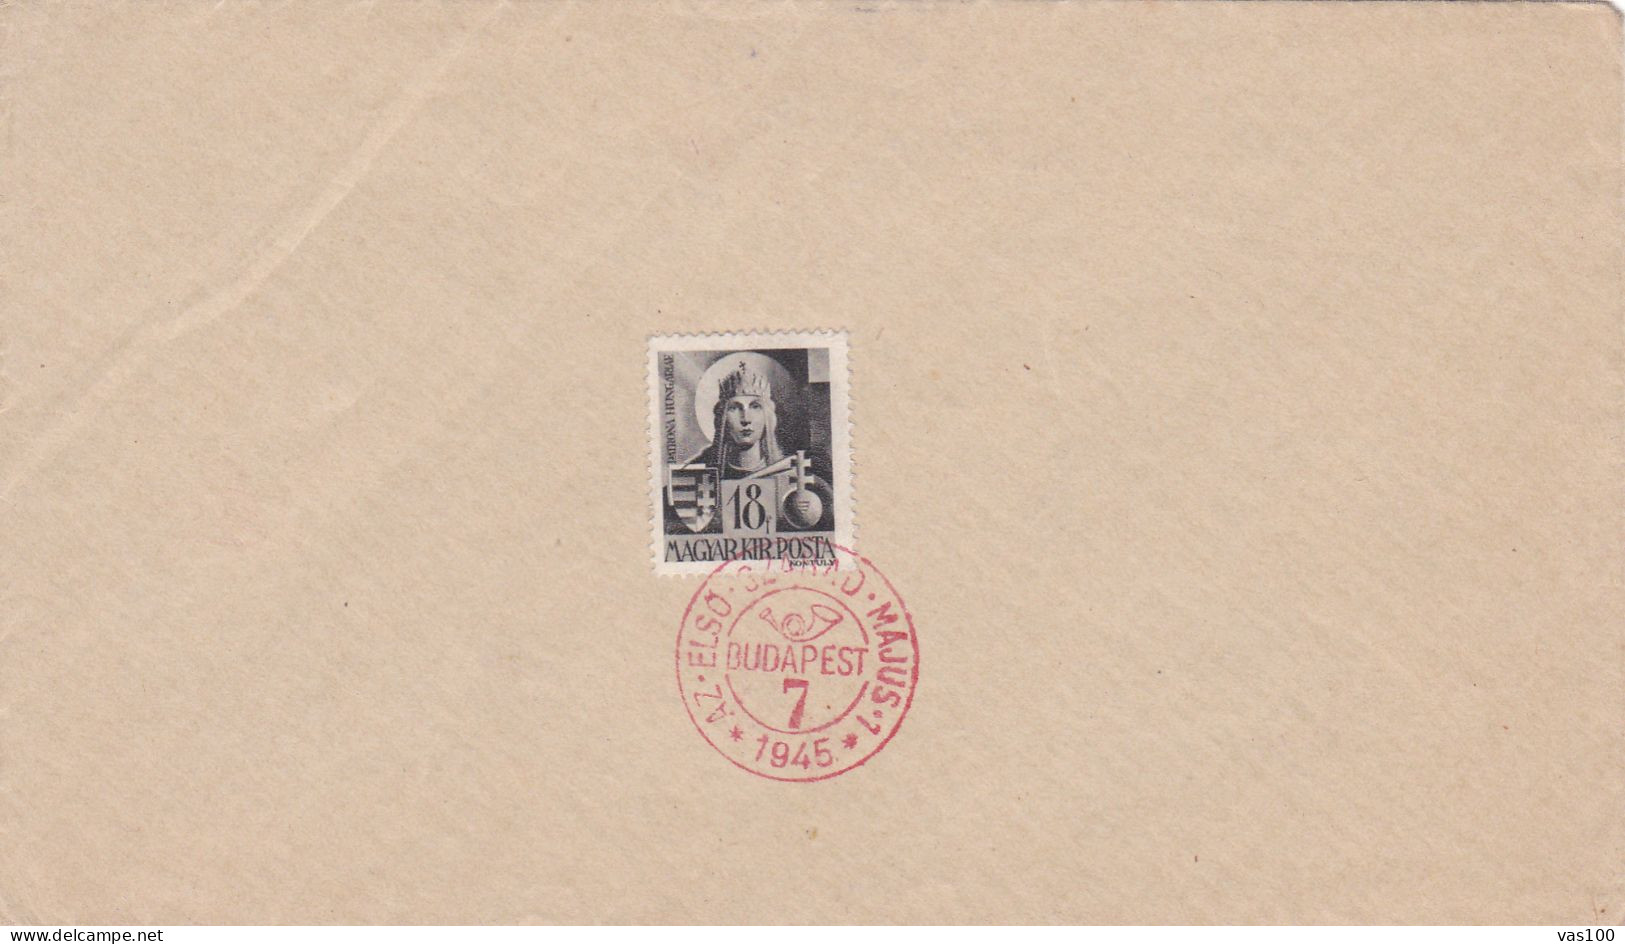 HISTORICAL DOCUMENTS HISTORICAL STANS  POSTA STATIONERY 1945 BUDAPEST - Covers & Documents